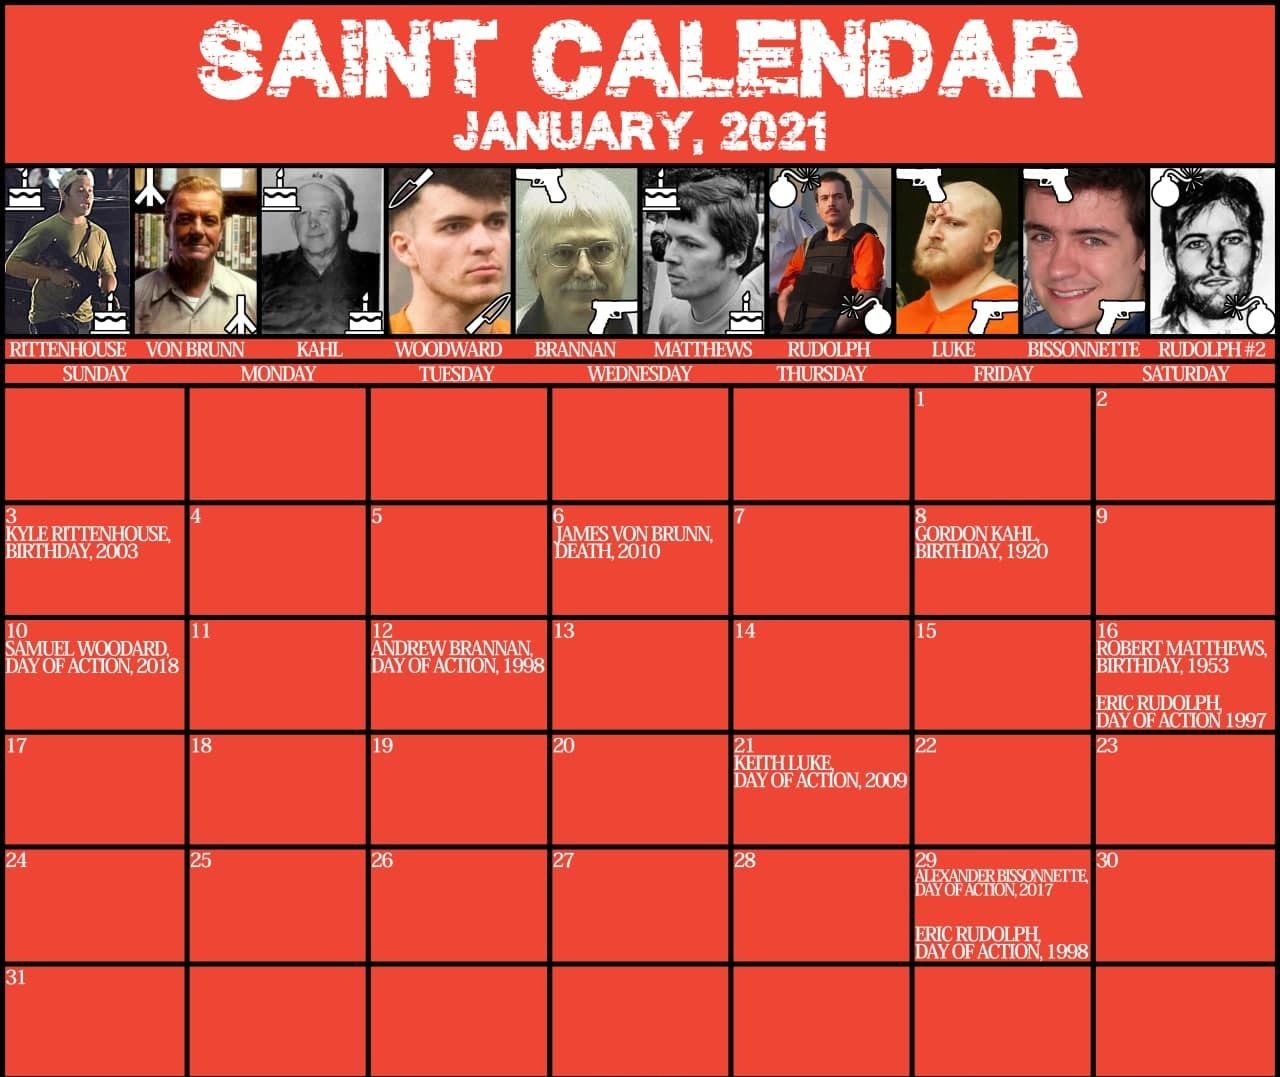 Example of a Sainthood meme listing individual mass killers’ Days of Action